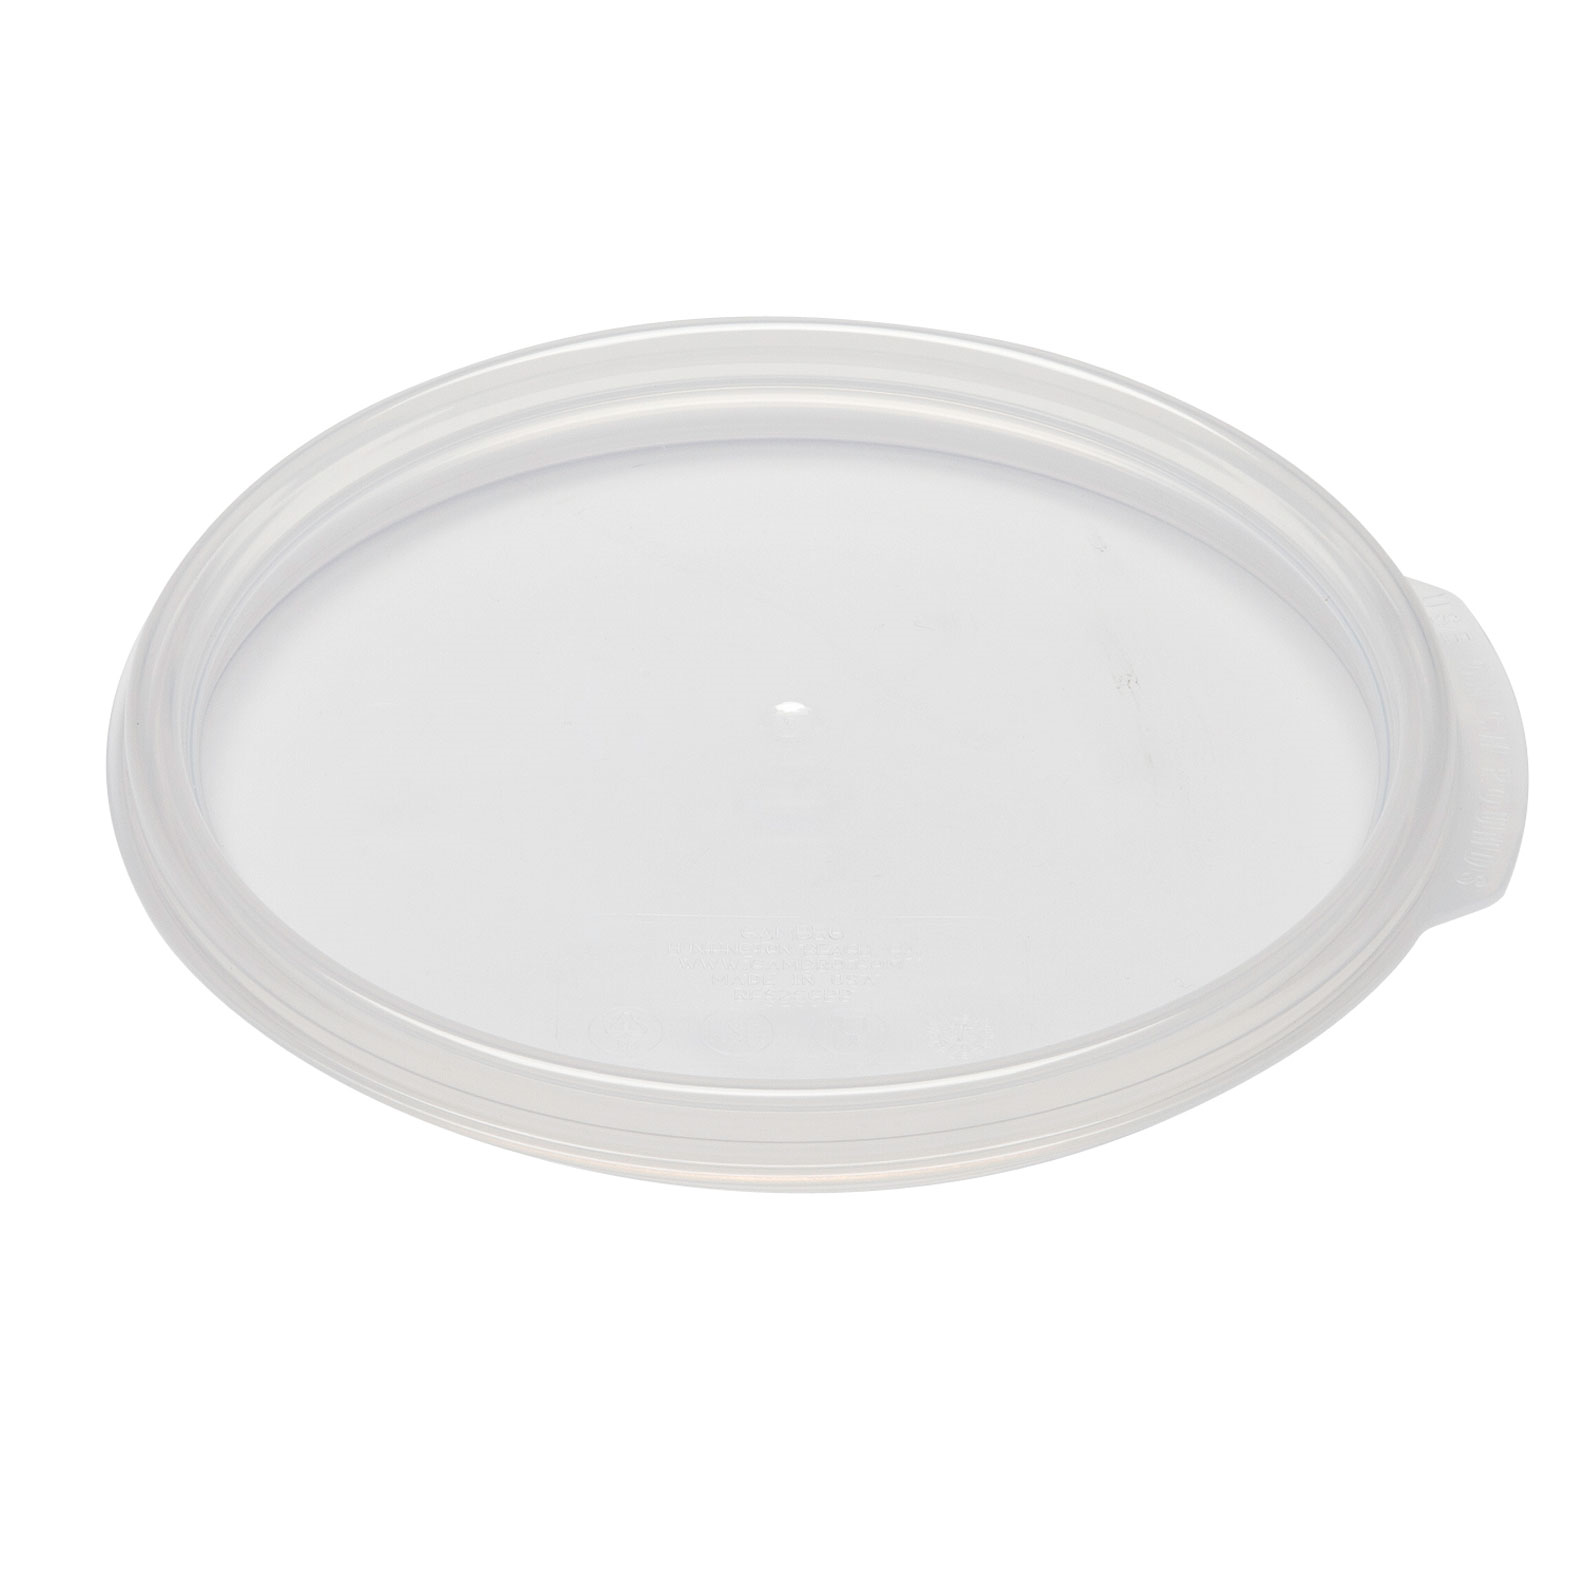 SEAL COVER FOR CW CLEAR 12, 18 &amp; 22qt. ROUND FOOD